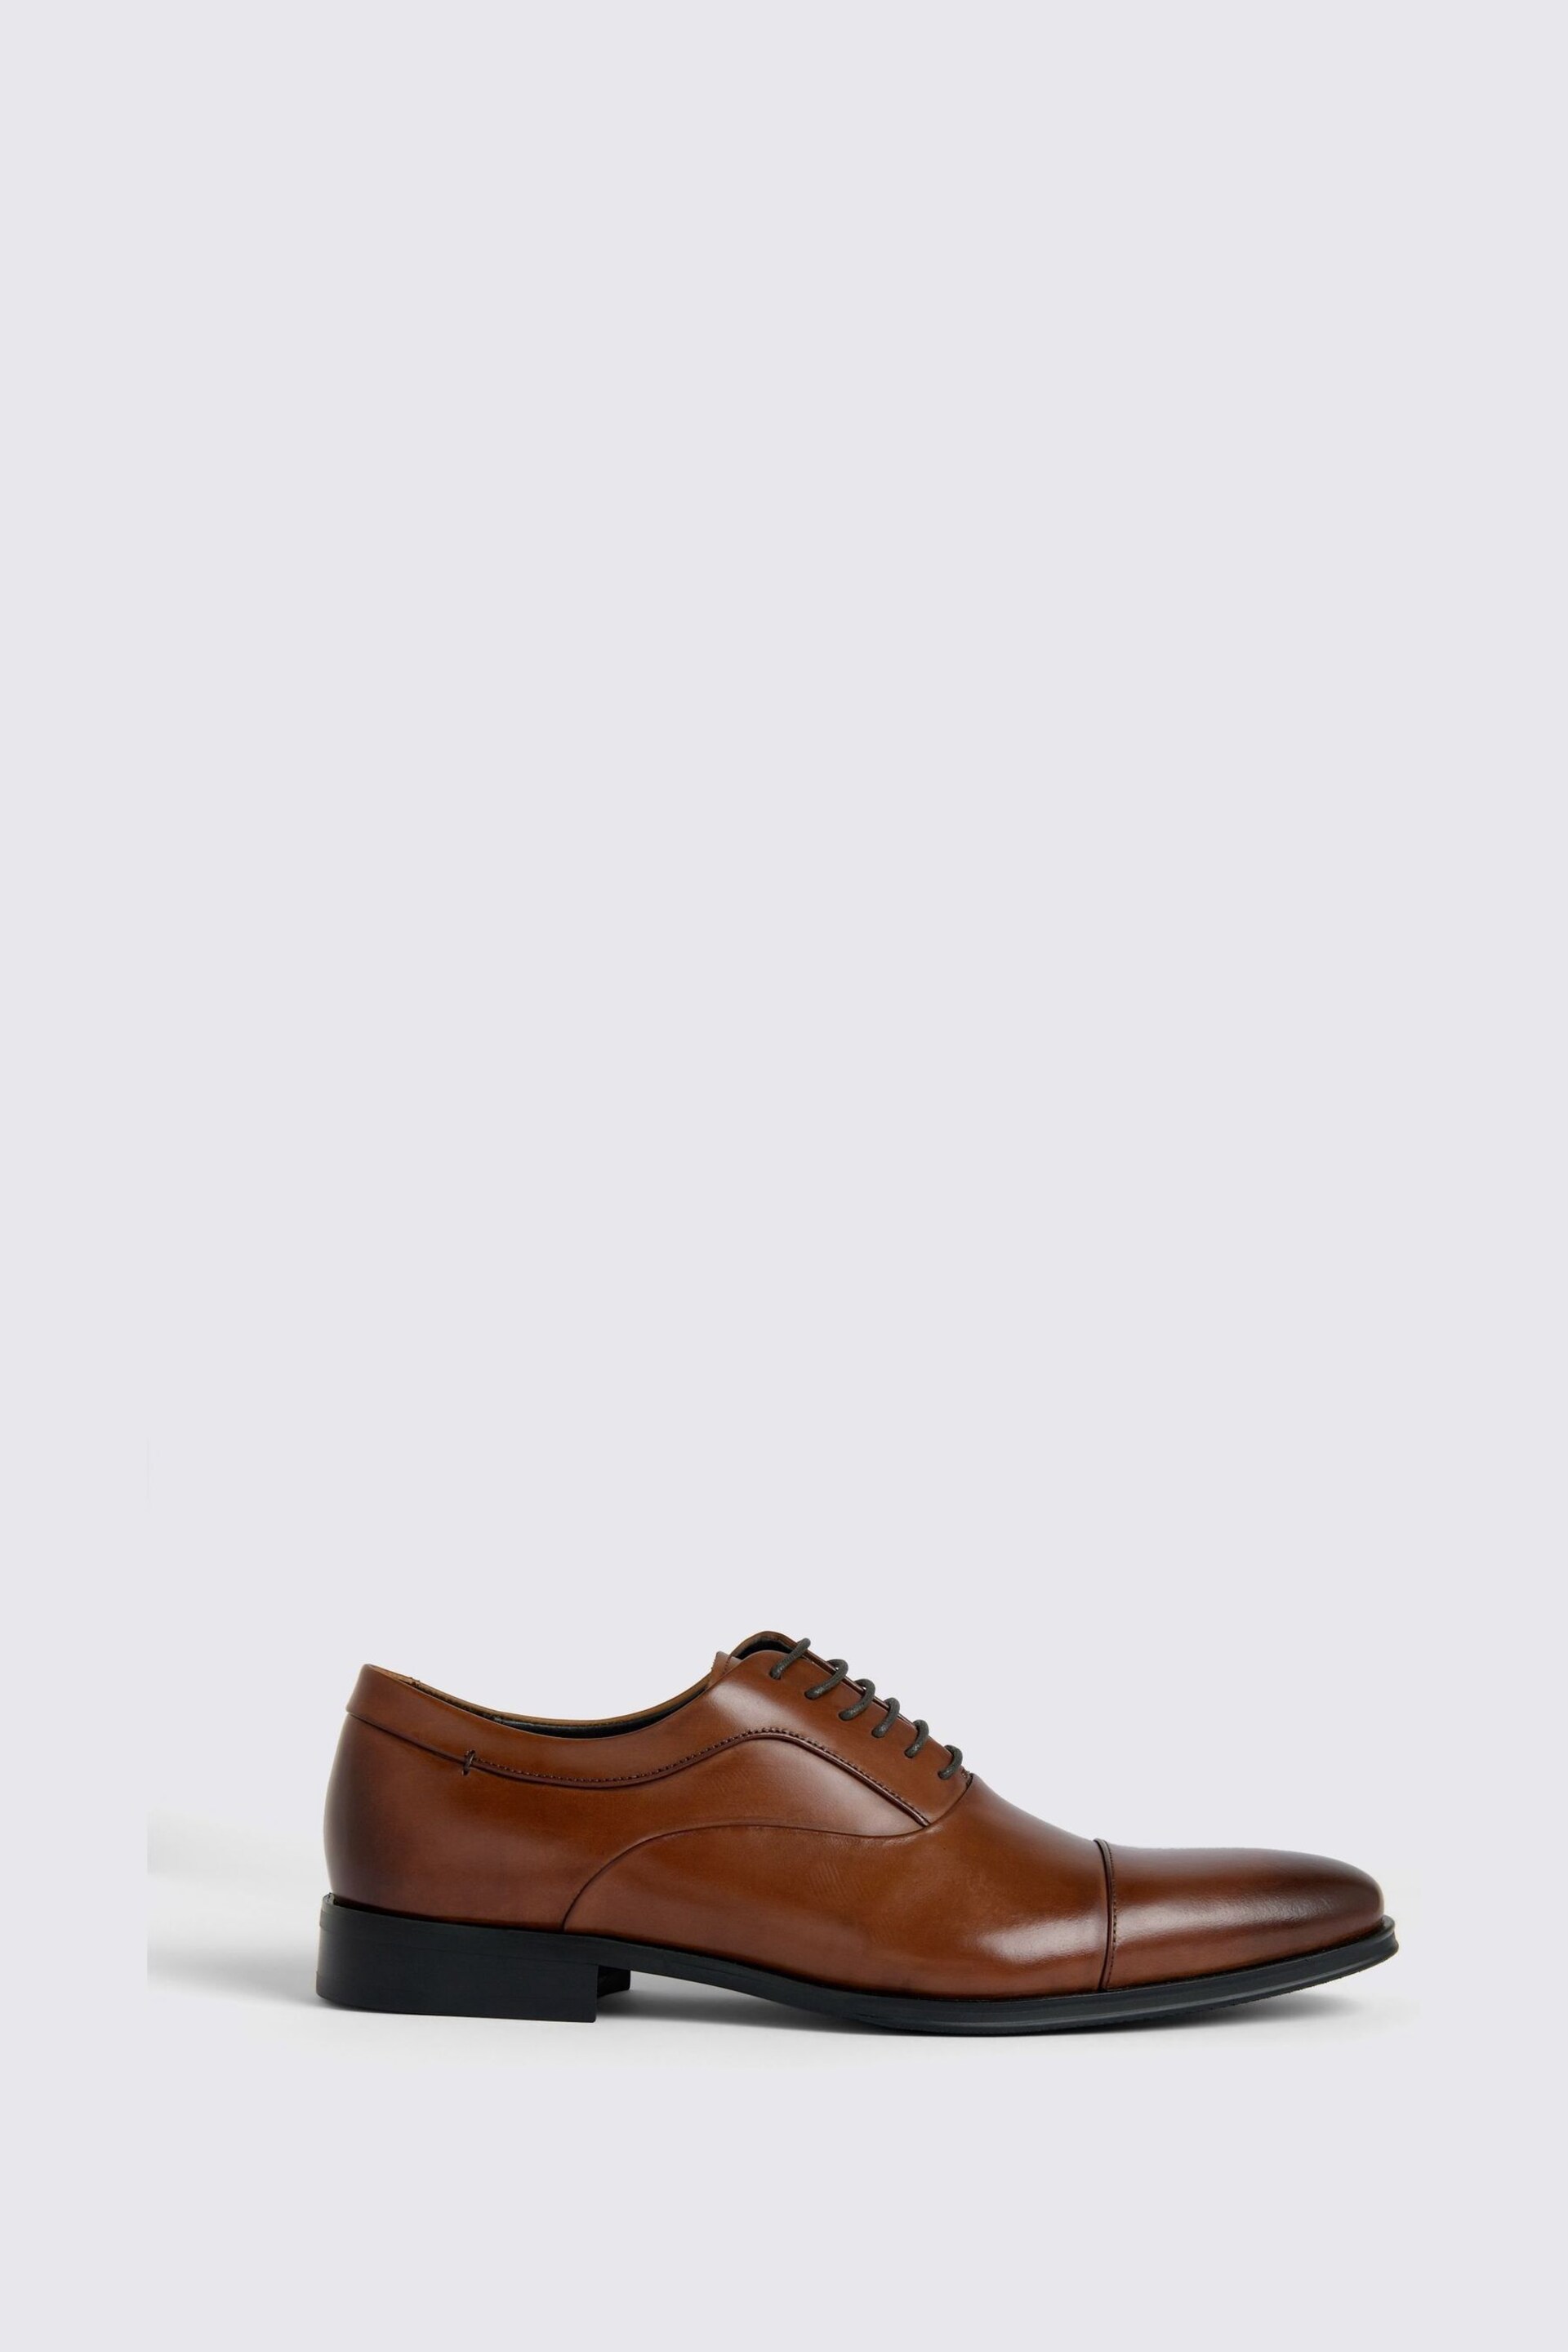 MOSS John Guildhall Oxford Shoes - Image 2 of 5